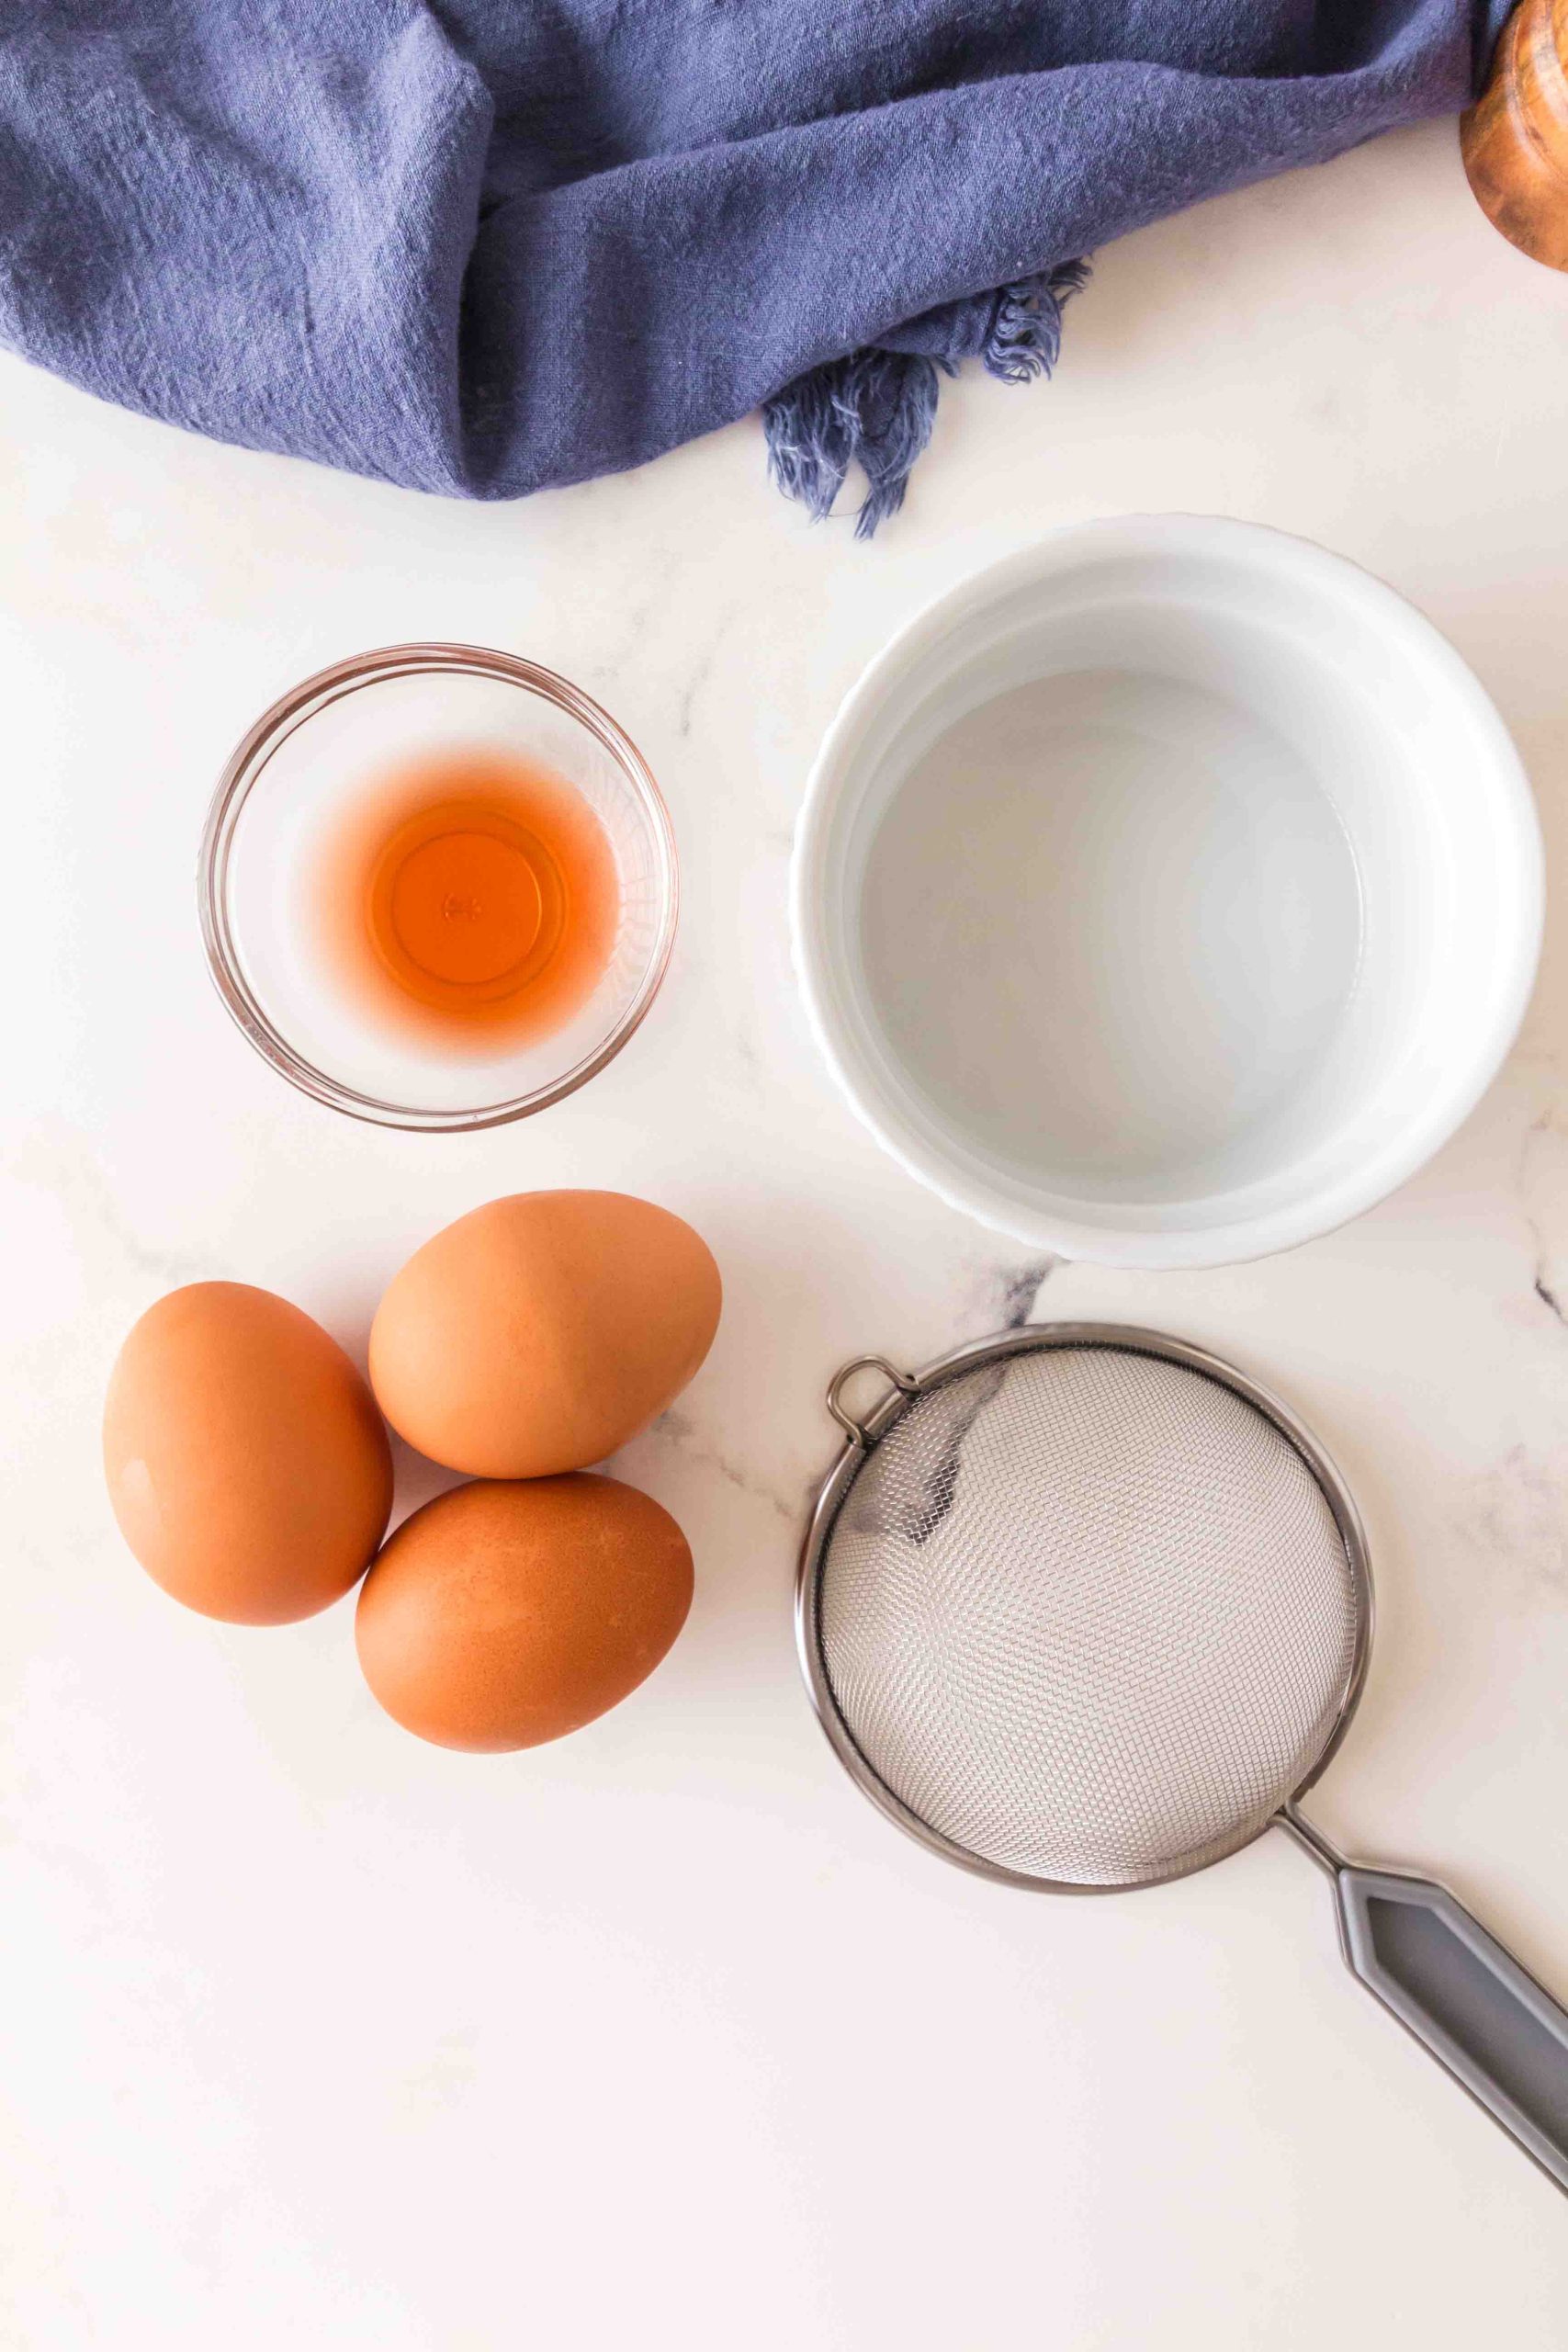 Equipment used to make poached eggs including fine mesh seive and a ramekin next to some uncooked eggs.